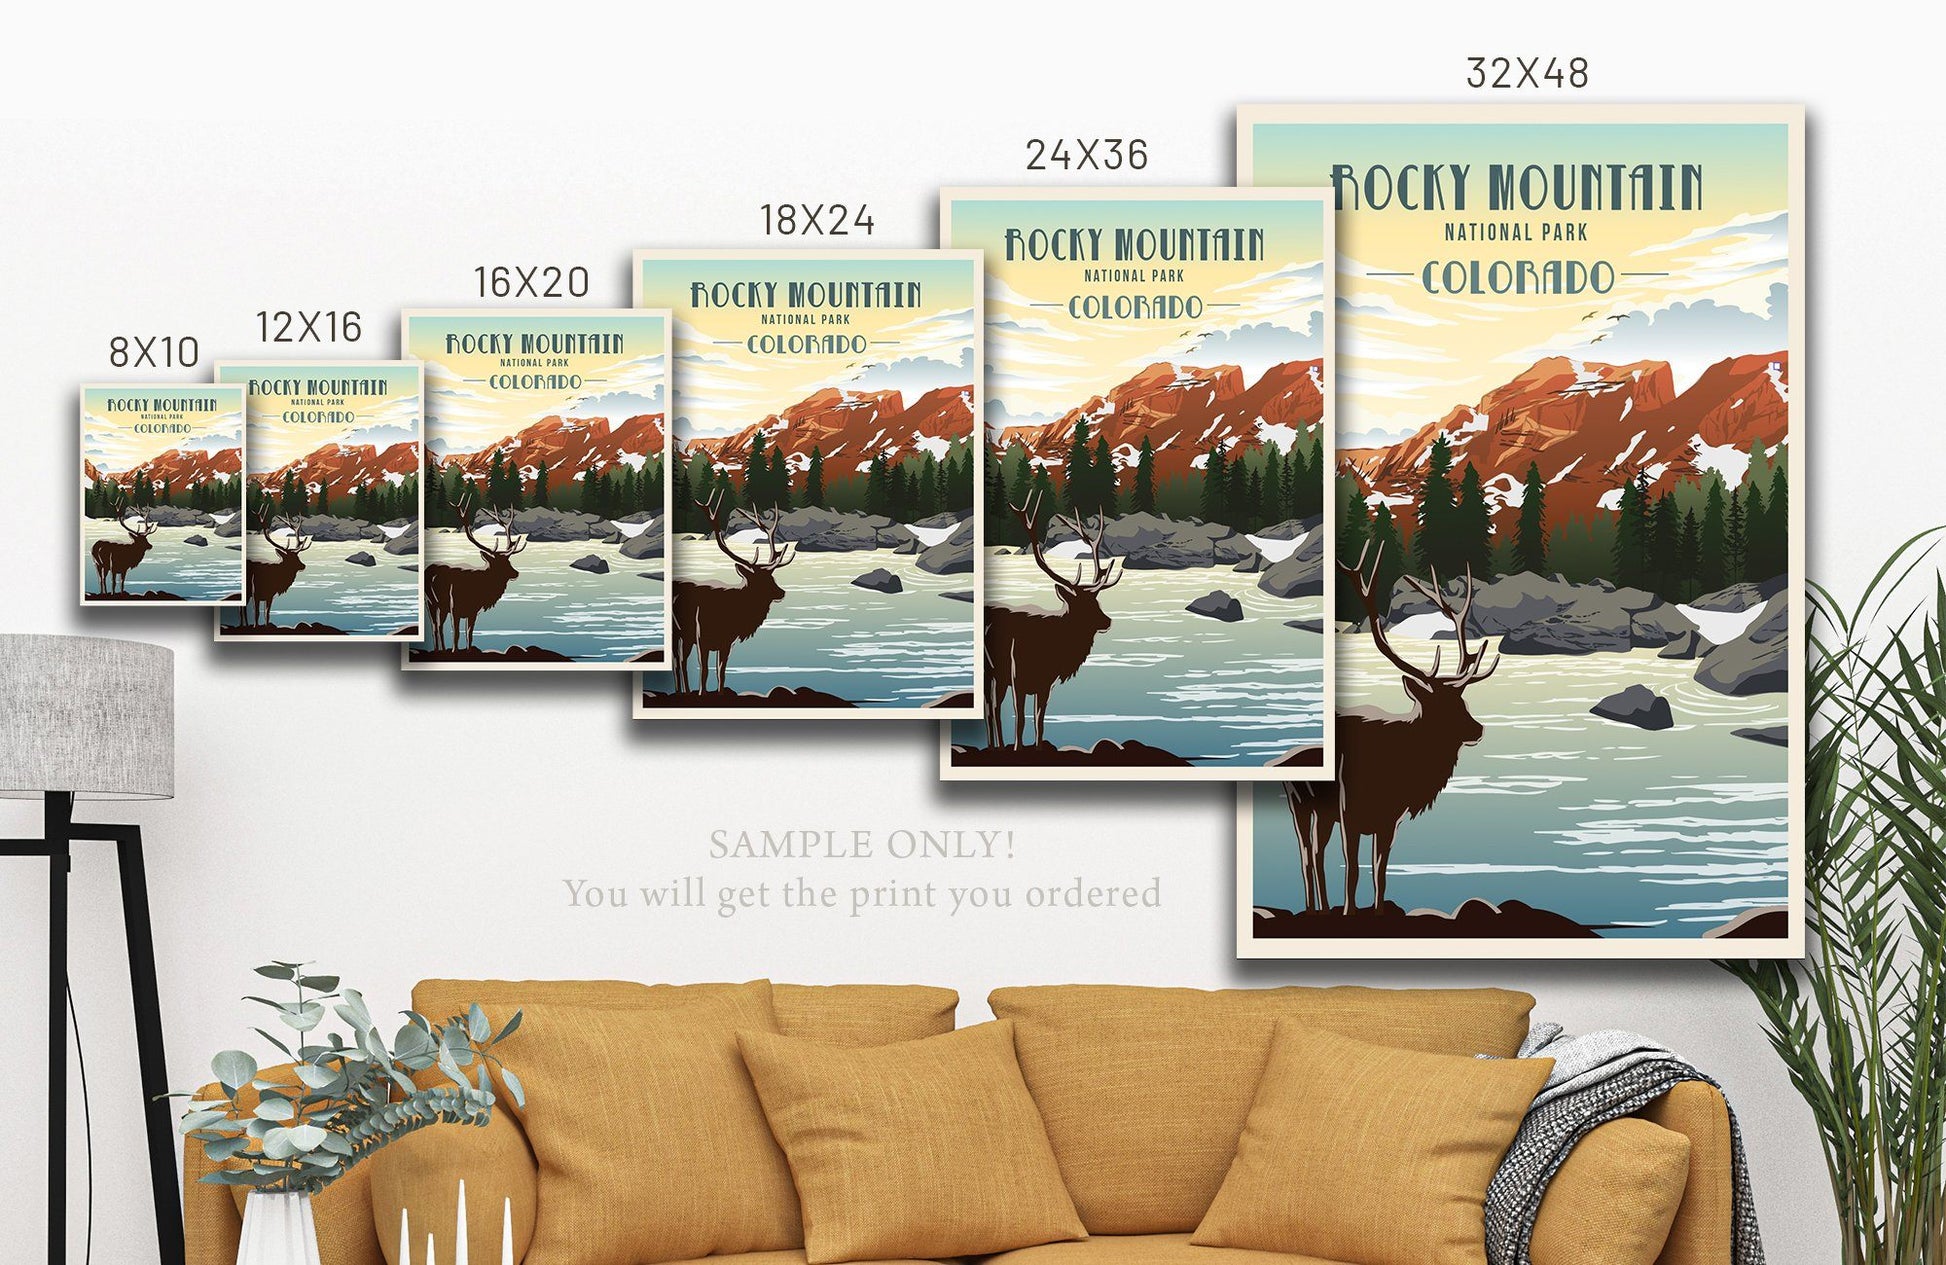 Kings Canyon National Park Poster, California, National Park Posters, Unframed Map World Vibe Studio 